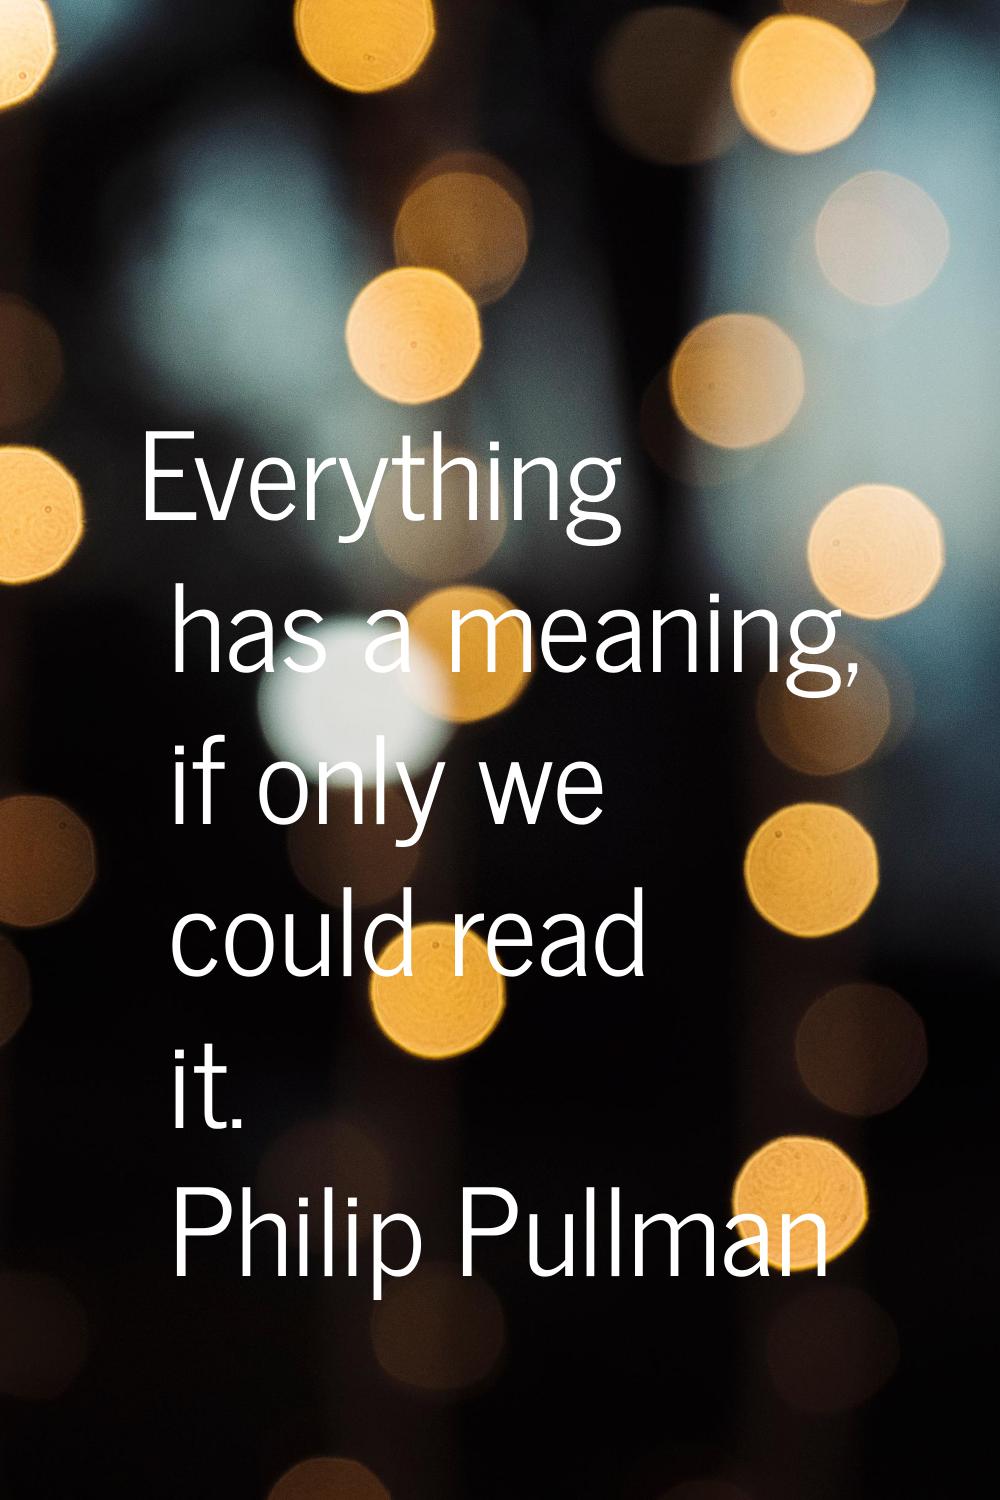 Everything has a meaning, if only we could read it.